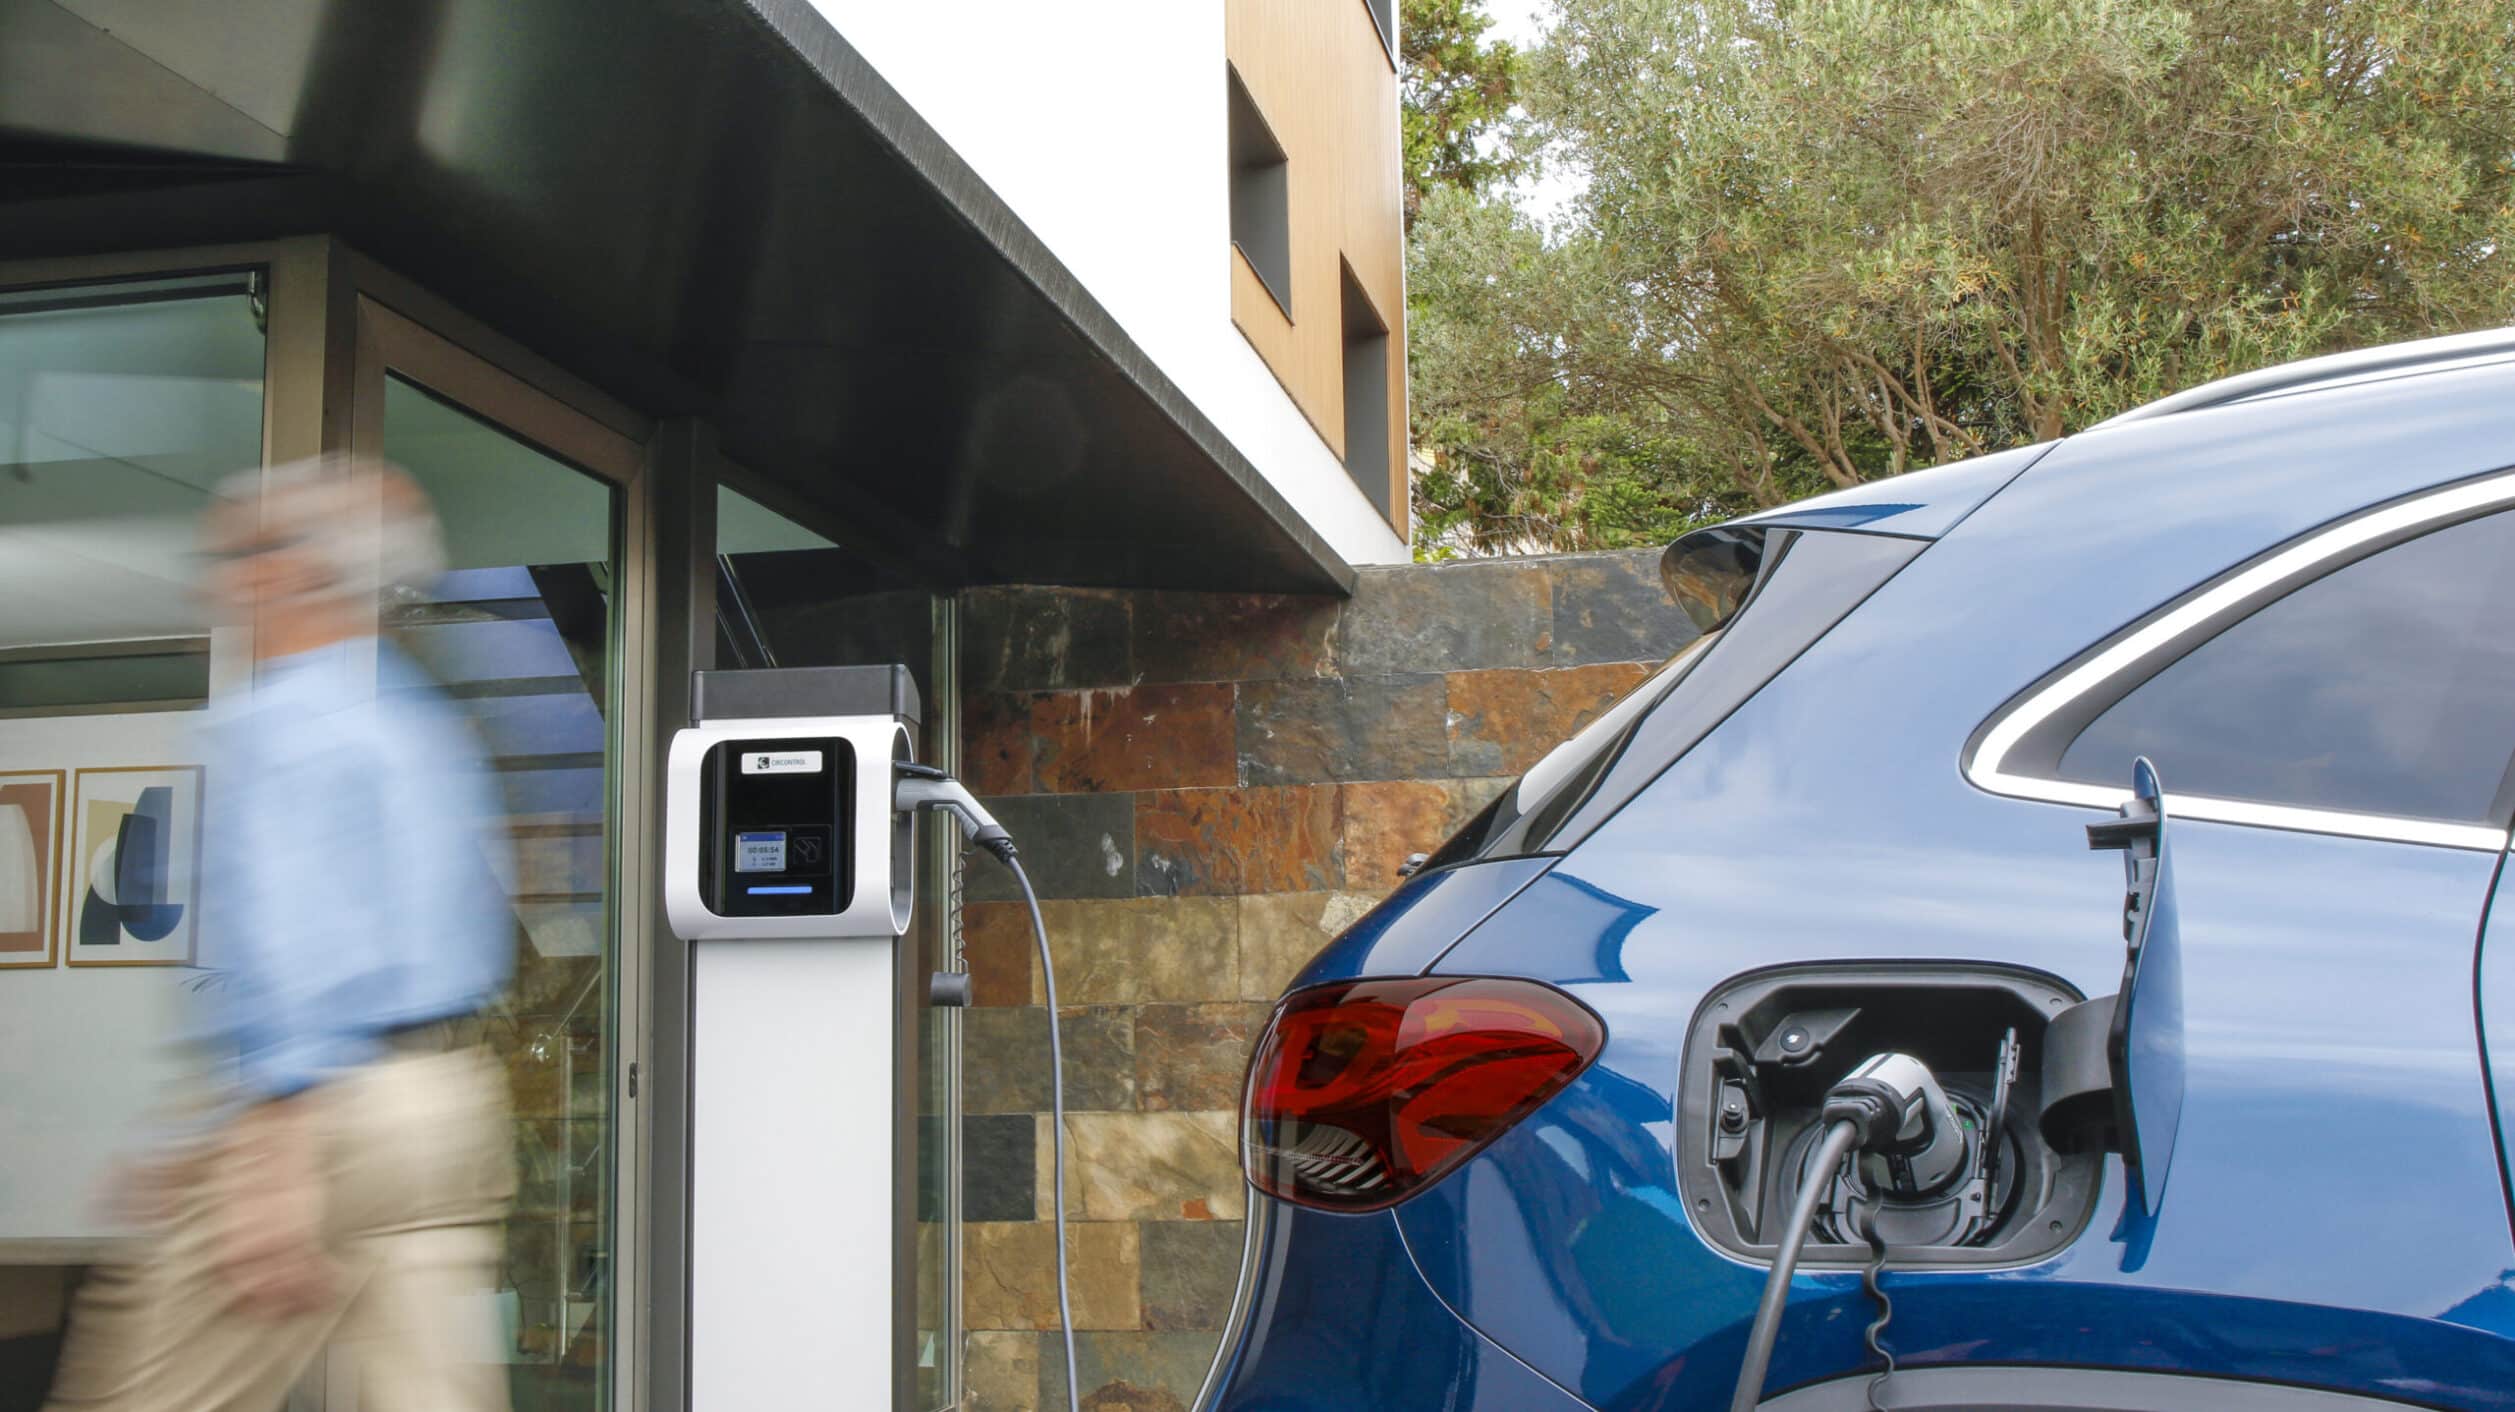 Circontrol's eNext EV charger can fit everywhere